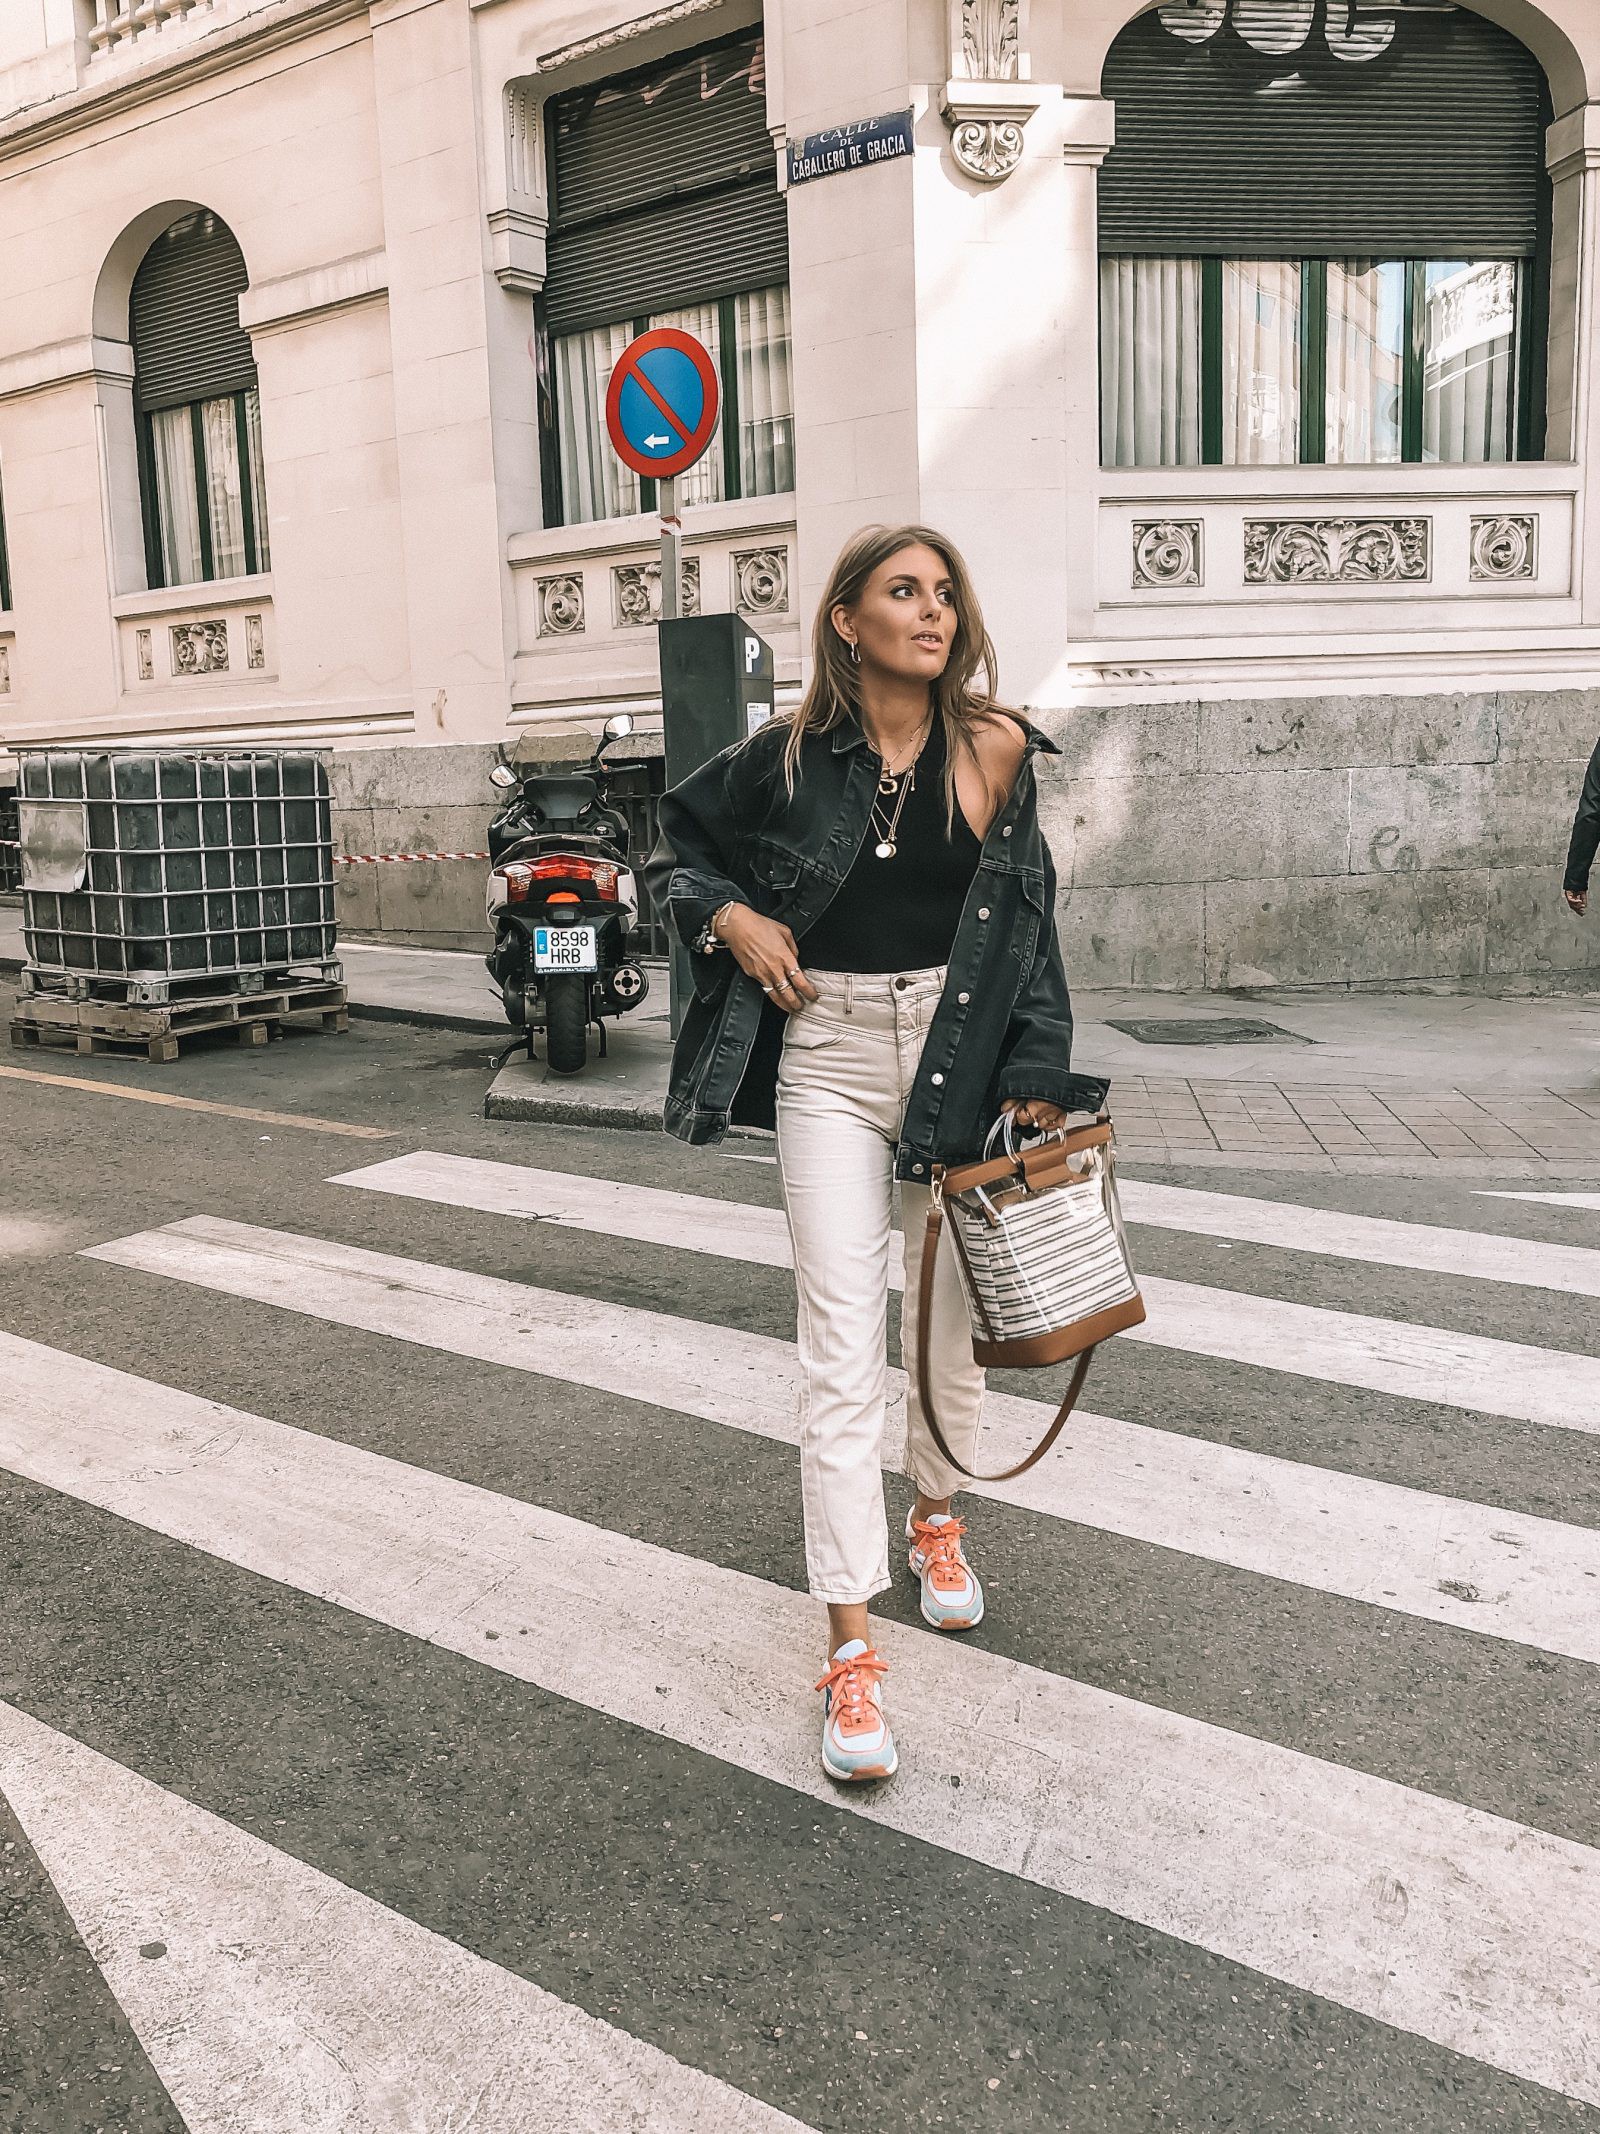 Madrid Outfit Diaries - Bolso transparente Accessorize: 